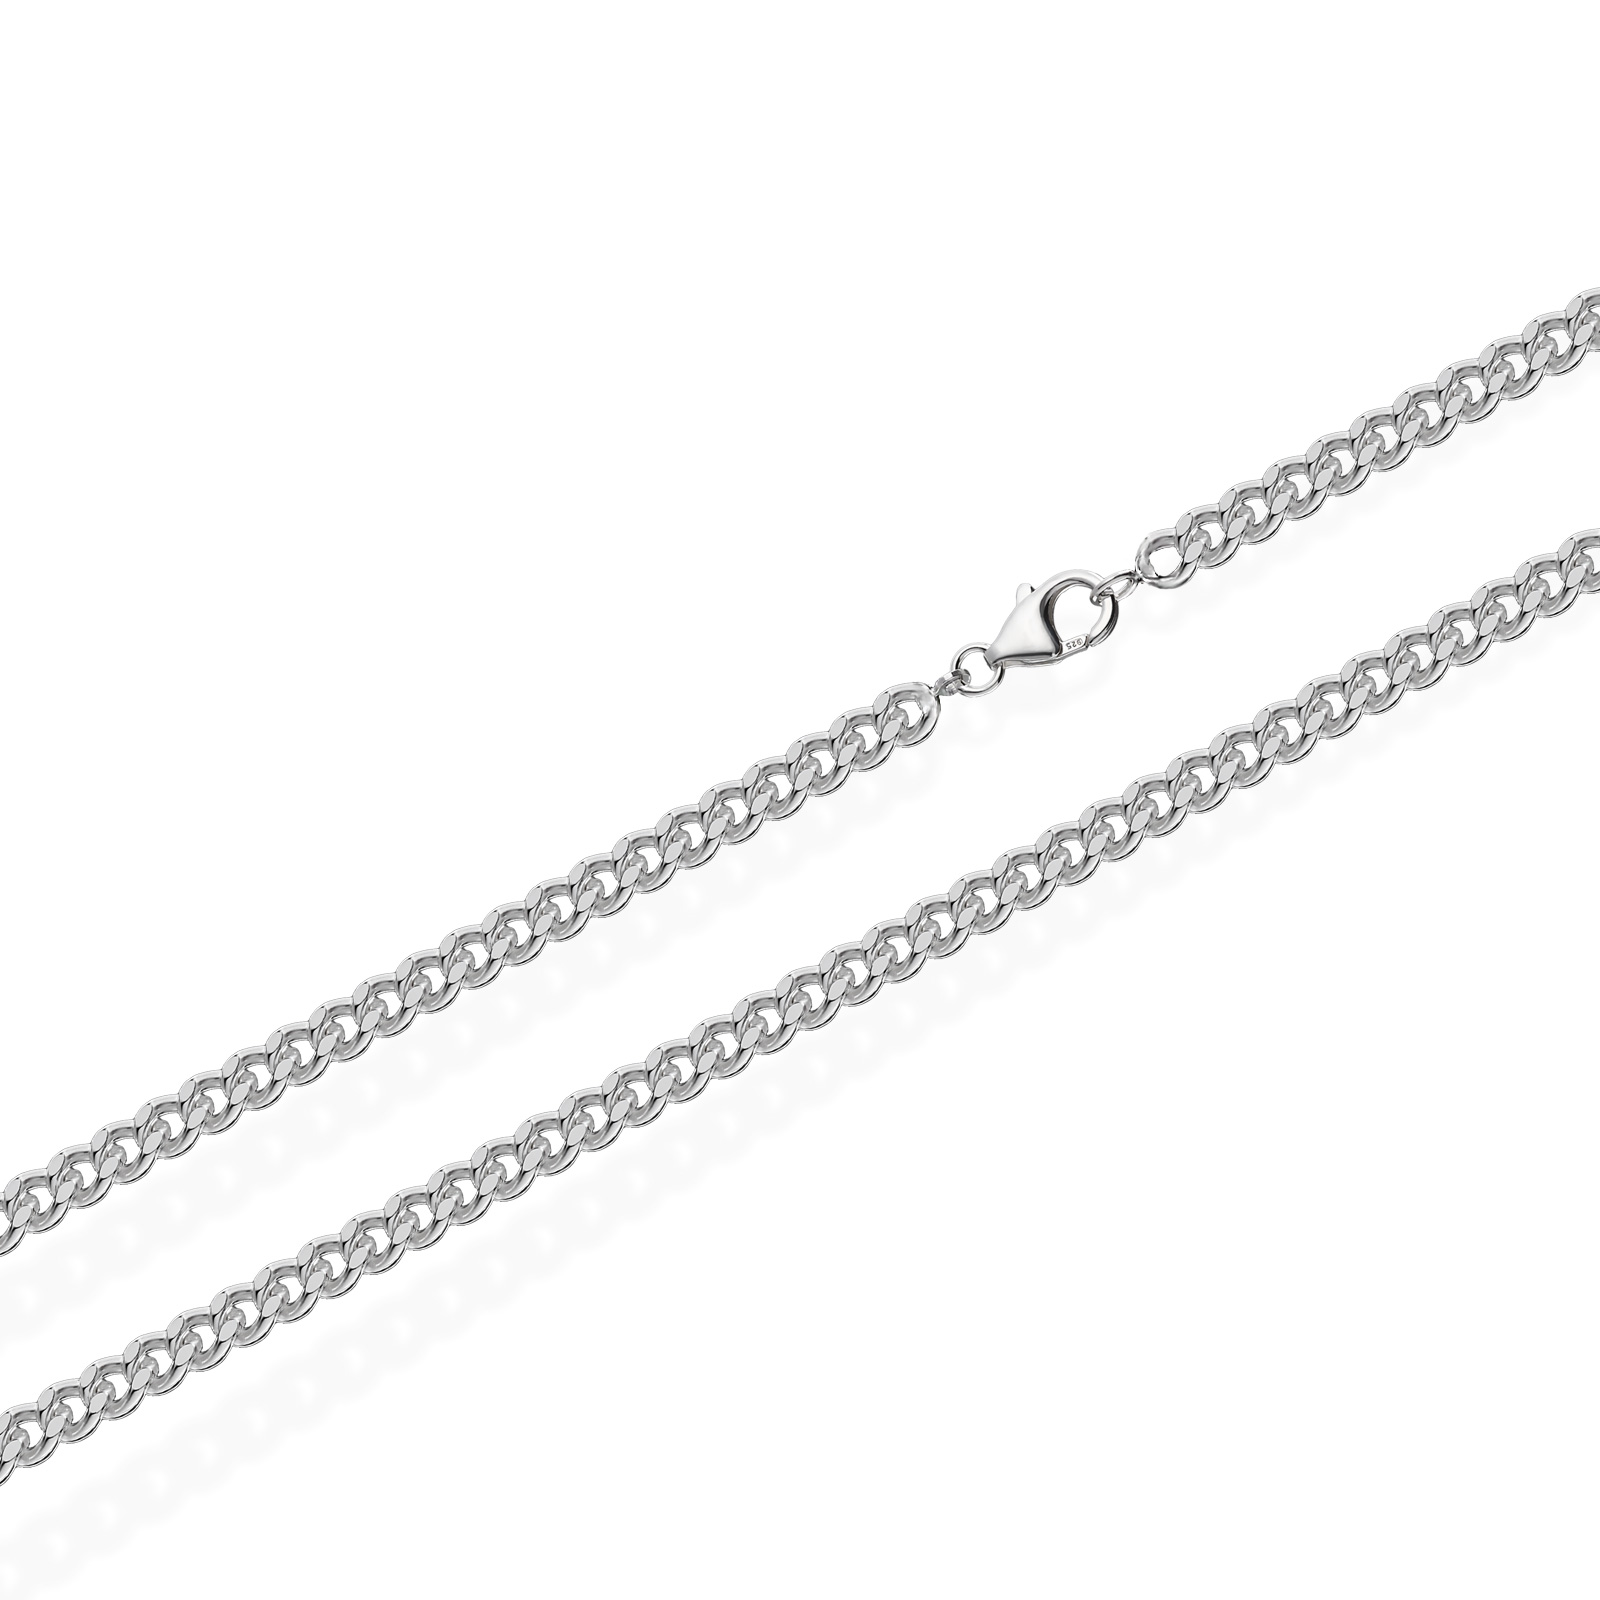 925 STERLING SILVER 16 18 20 22 24 28 30 31" INCH FLAT CURB LINK CHAIN NECKLACE